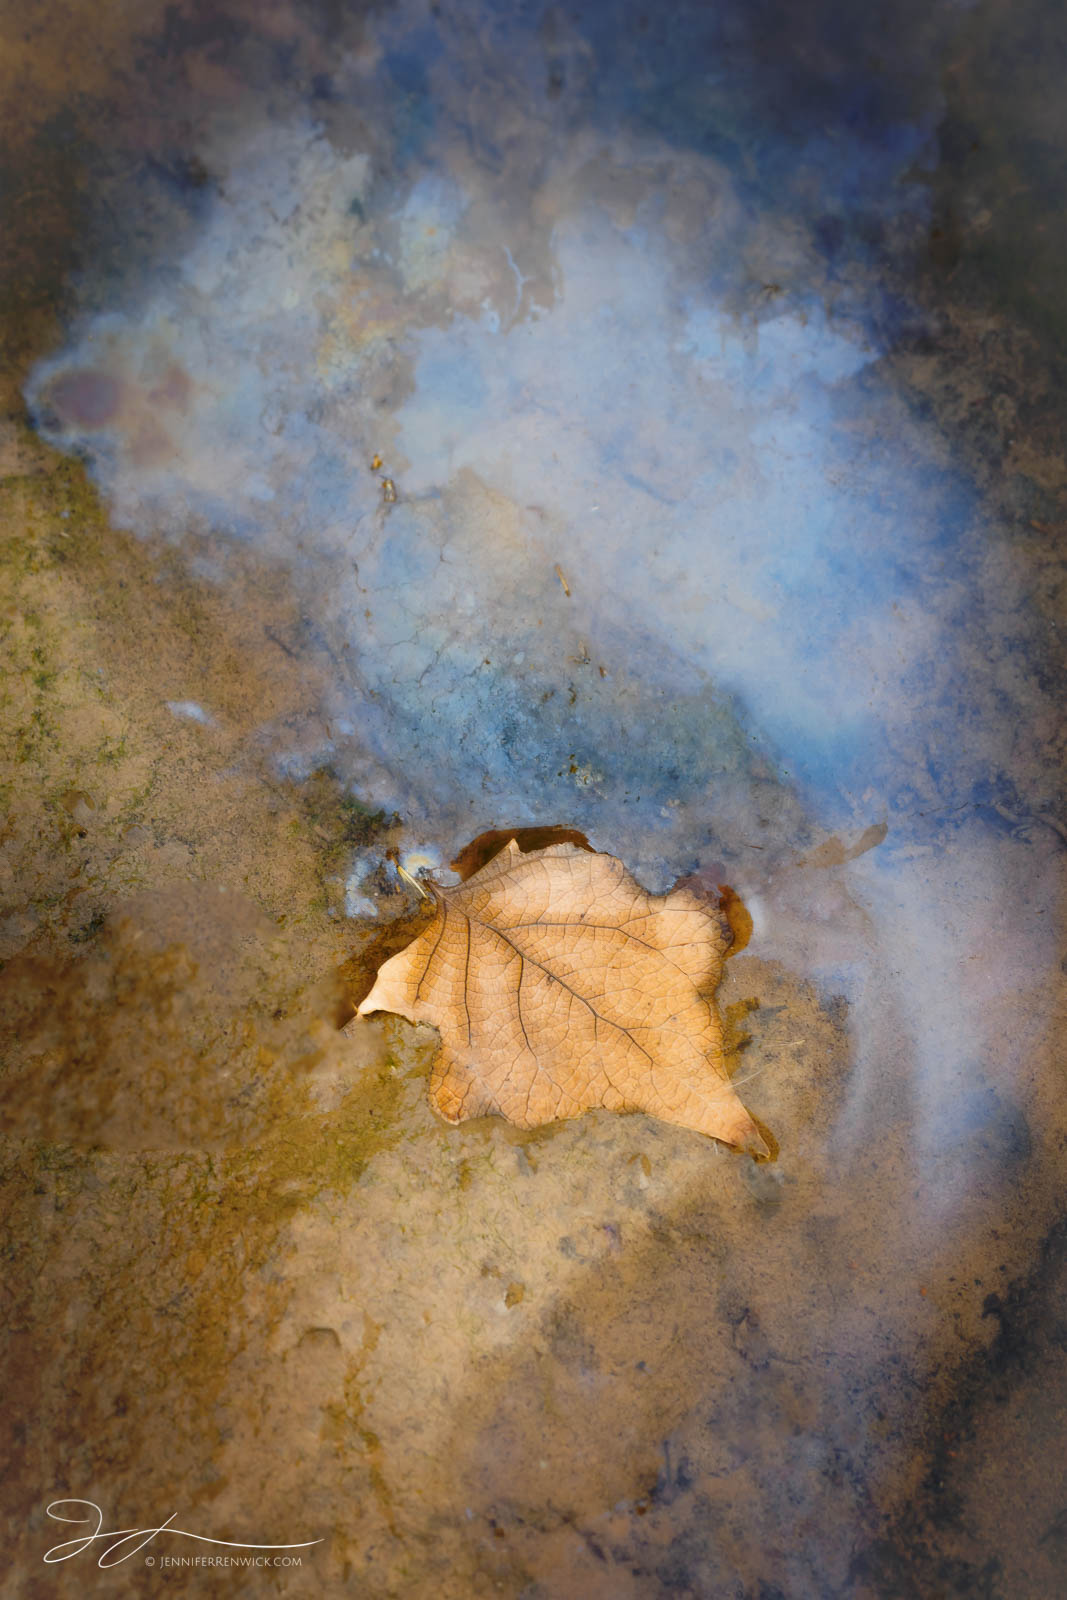 A decaying leaf in a puddle leaves behind a colorful blue oil slick left behind by natural decay.  This image is part of my "...